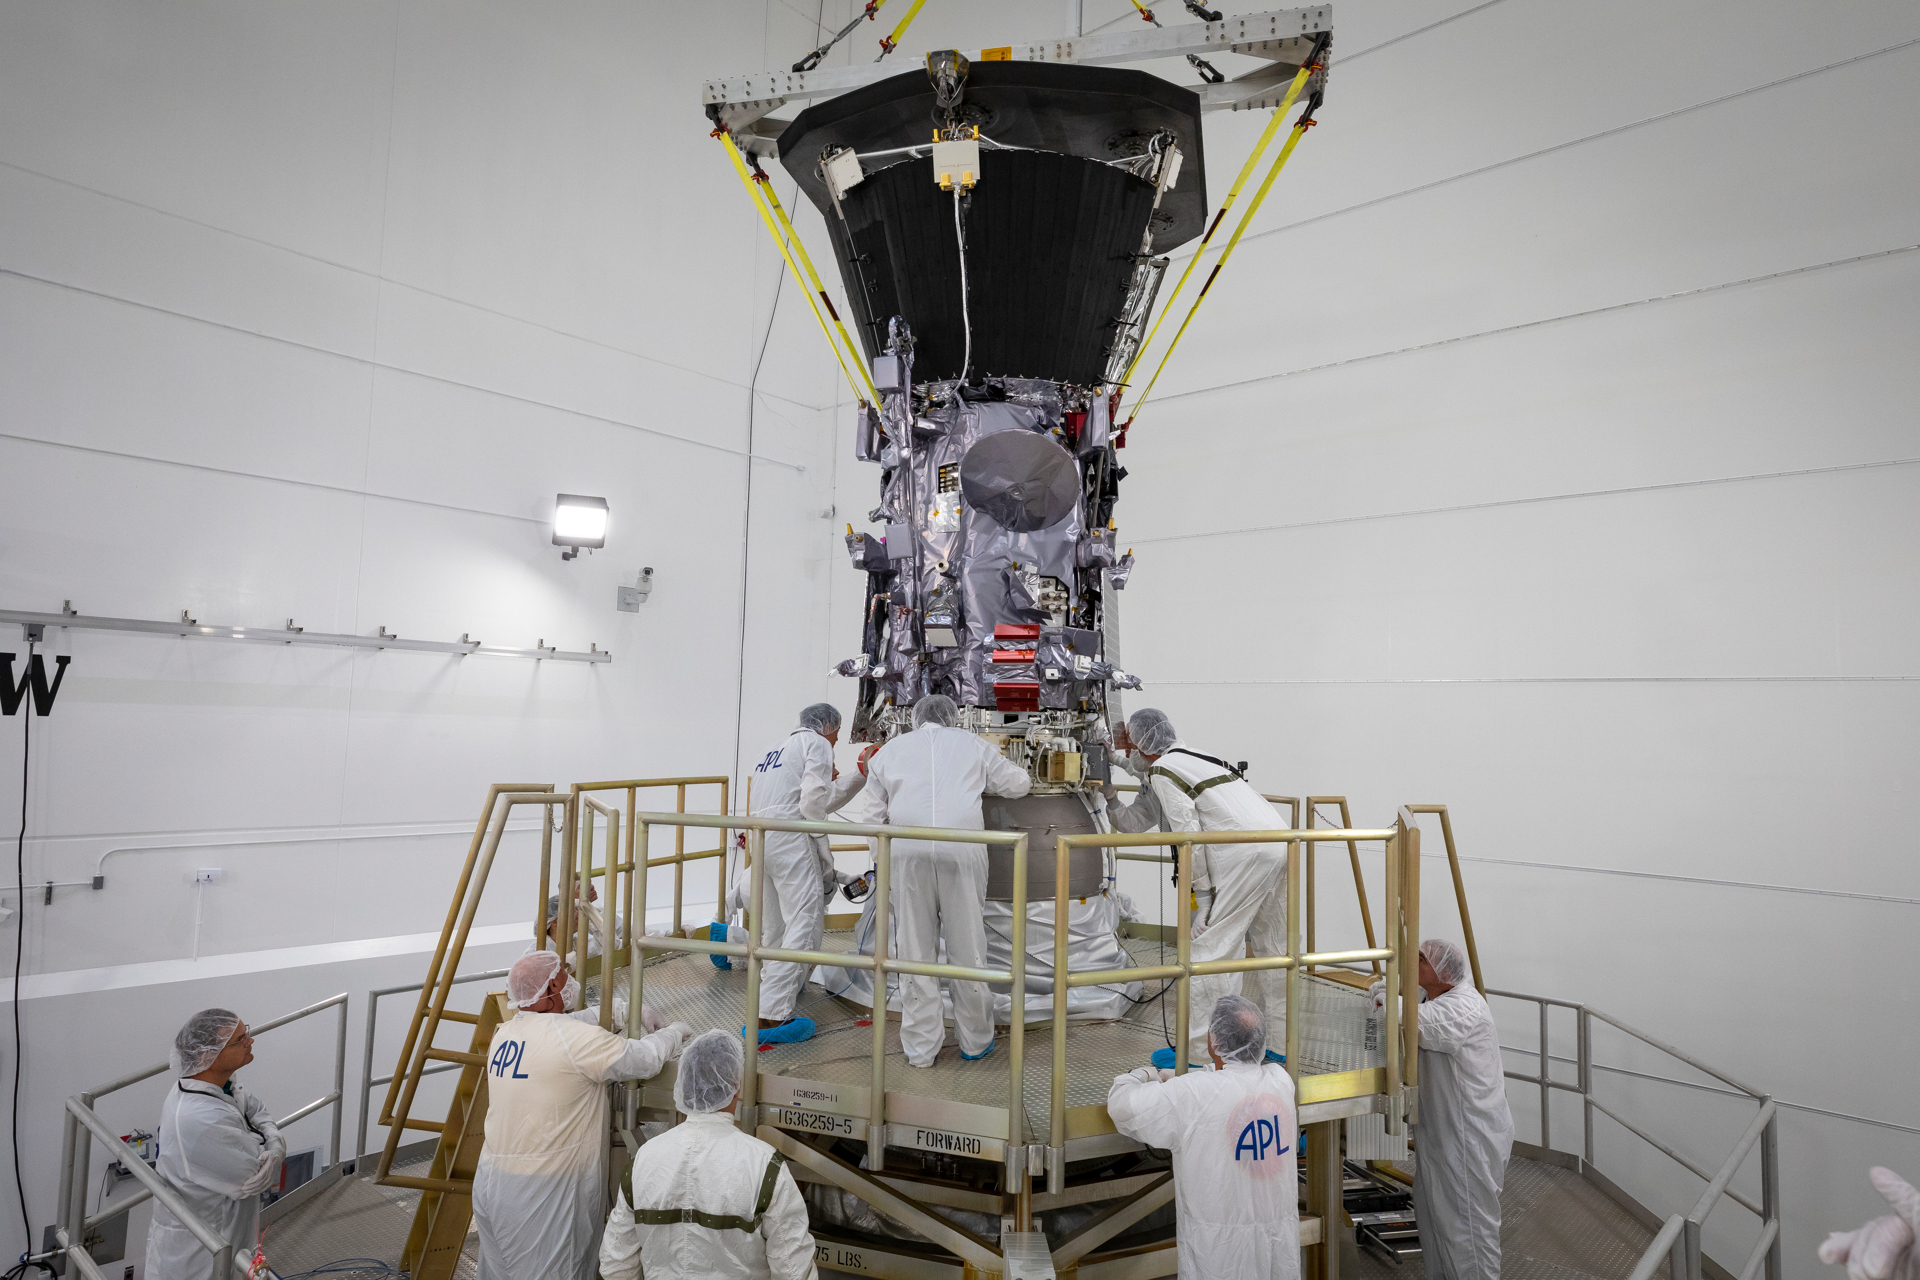 NASA’s Parker Solar Probe is mated to the third stage rocket motor on July 11, 2018, at Astrotech Space Operations in Titusville, Florida. In addition to using the largest operational launch vehicle, the Delta IV Heavy, Parker Solar Probe will use a third stage rocket to gain the speed needed to reach the Sun, which takes 55 times more energy than reaching Mars. 